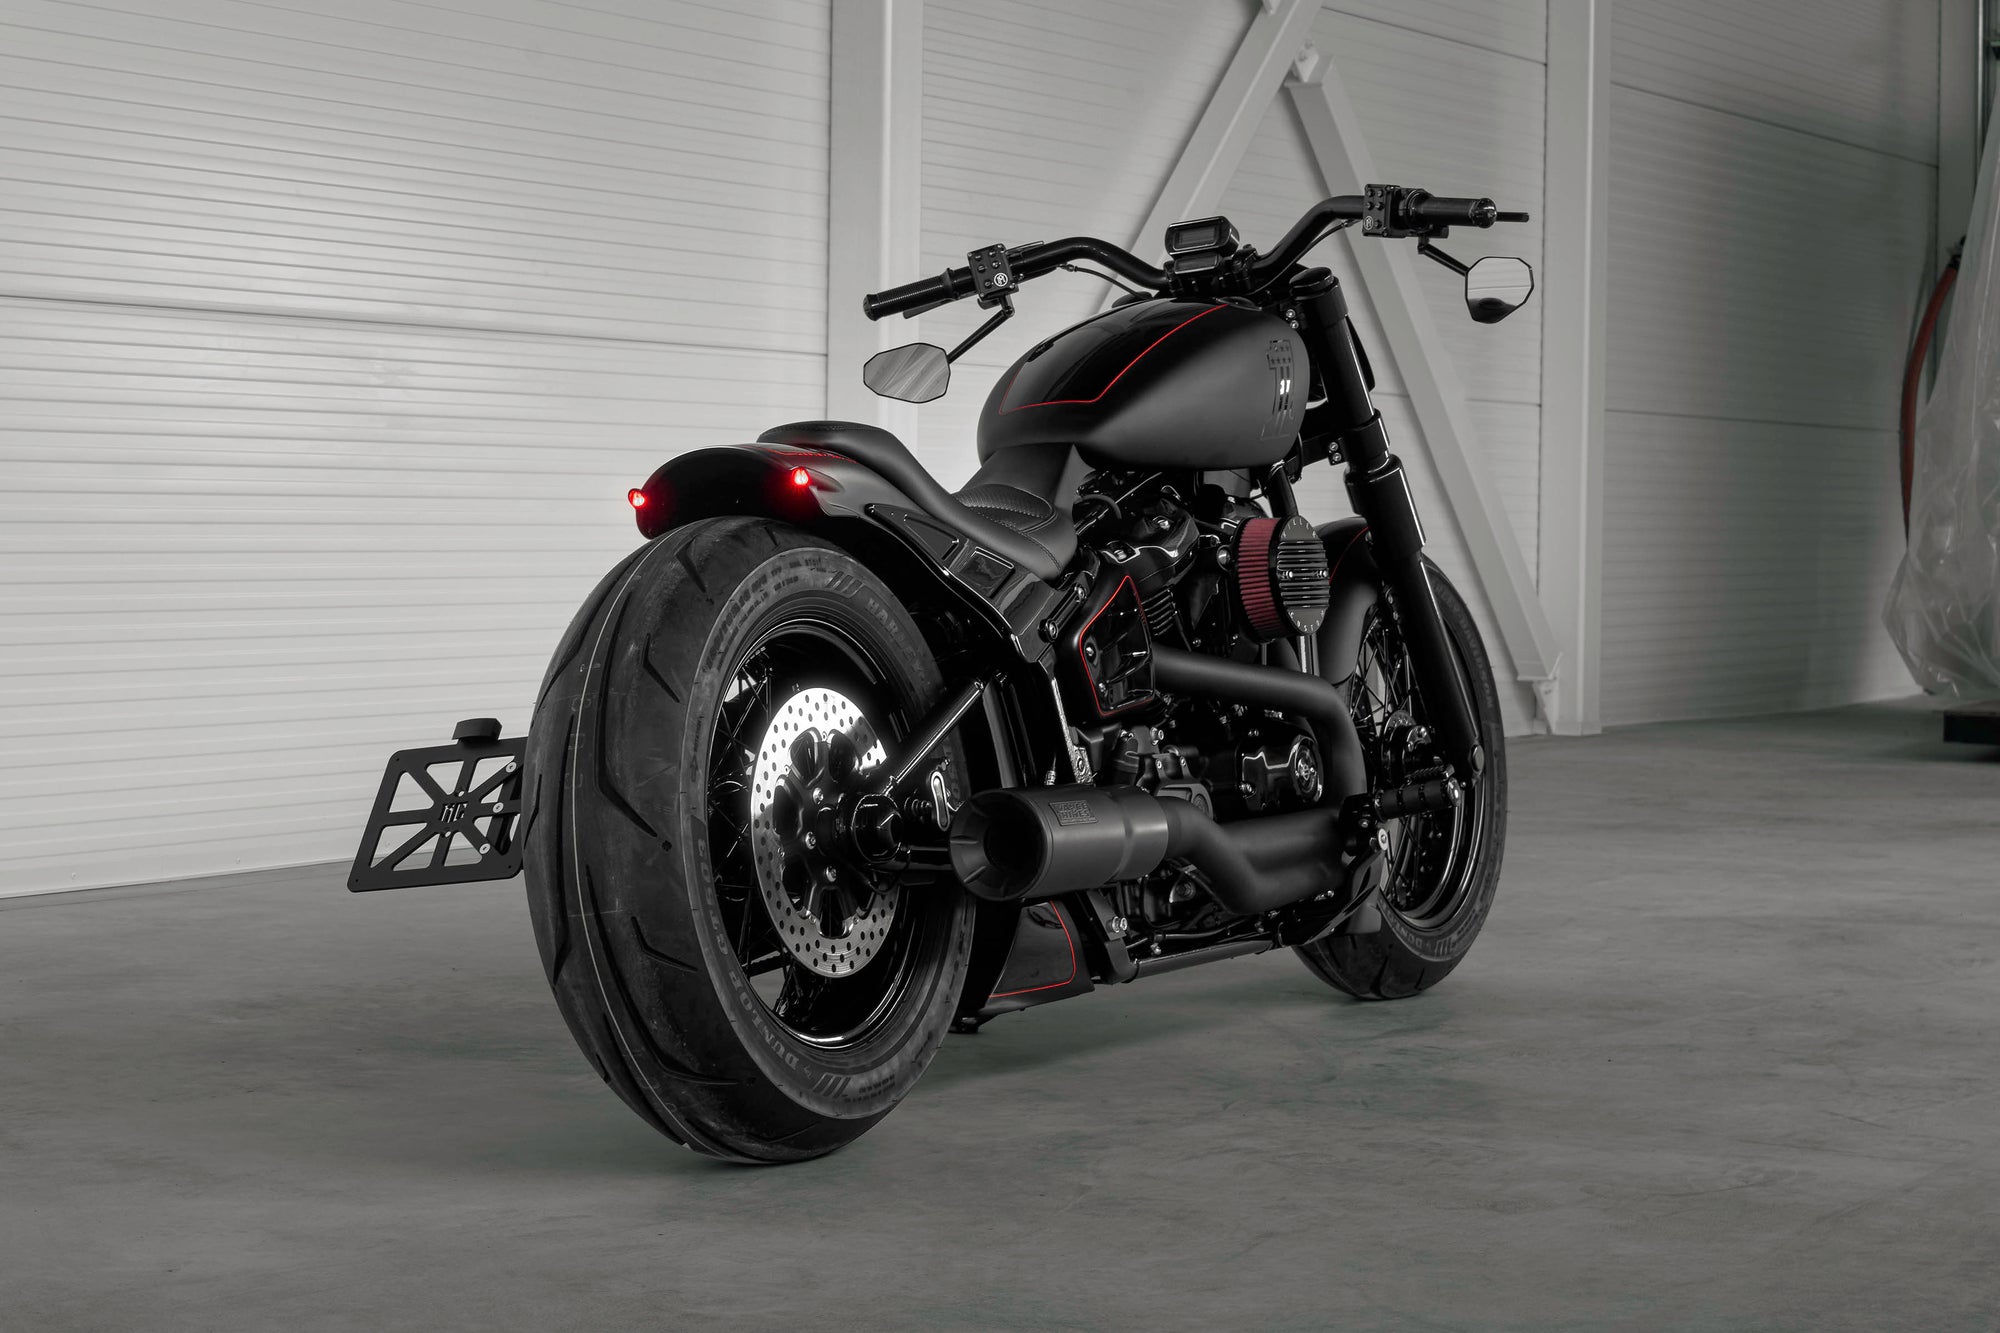 Harley Davidson motorcycle with Killer Custom parts from the rear in a modern white garage